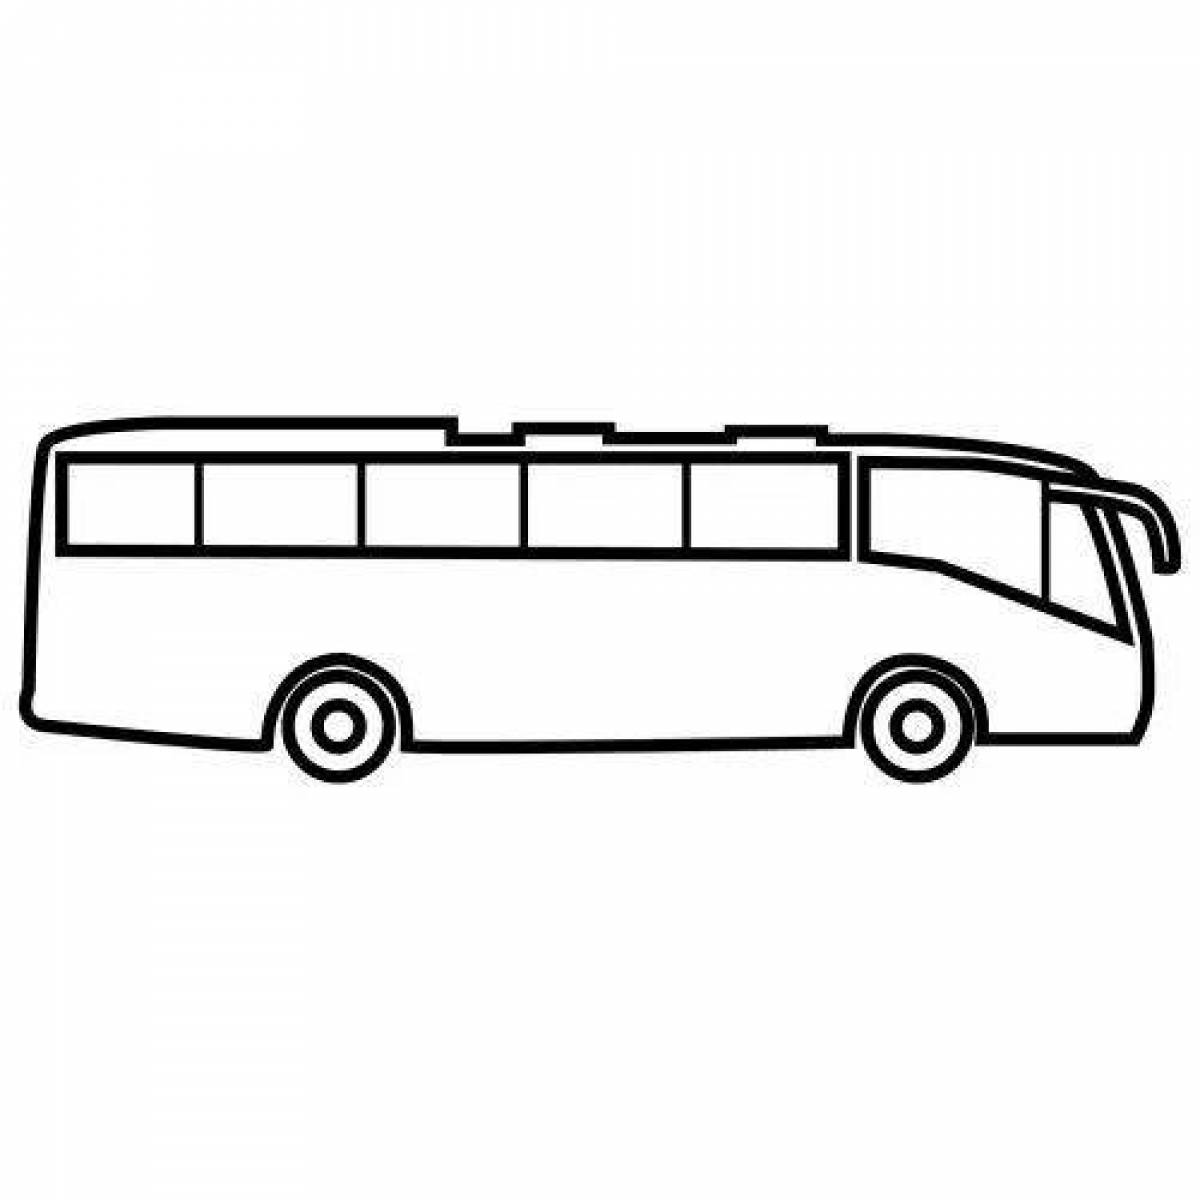 Exciting bus groove coloring page